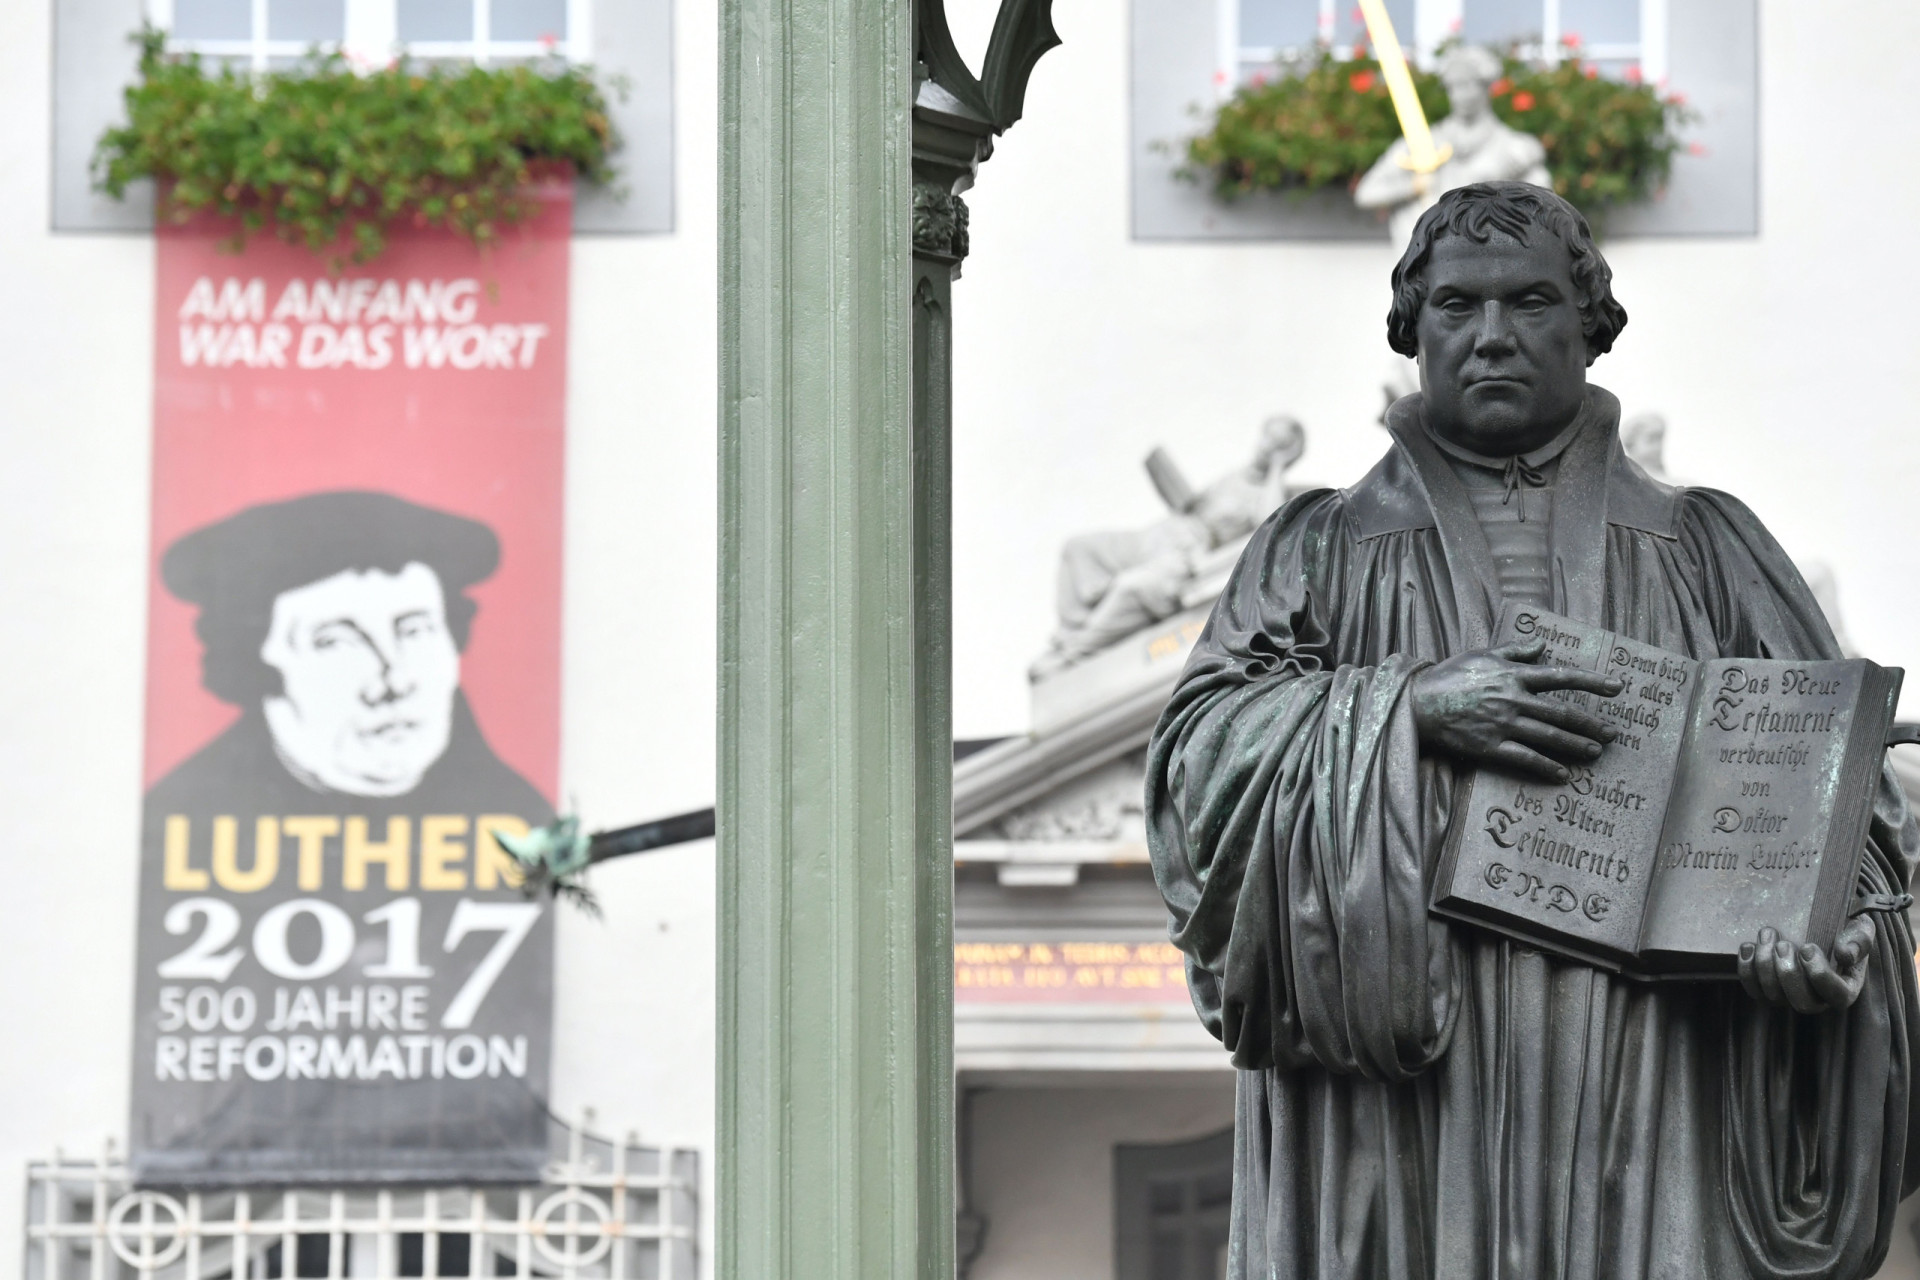 <p>Travelers can follow the footsteps of Martin Luther in the states of Saxony-Anhalt and Thuringia, a region deemed as Luther Country. Sites related to the Protestant Reformation are located in several cities throughout the region. </p><p>Sources: (<a href="https://www.nationalgeographic.co.uk/travel/2021/04/top-10-pilgrimage-routes-around-the-world" rel="noopener">National Geographic</a>) (<a href="https://www.tourism-review.com/fascinating-pilgrimage-destinations-in-europe-news10759" rel="noopener">TourismReview</a>)</p><p>See also: <a href="https://www.starsinsider.com/travel/430482/interesting-religious-sites-around-the-world">Interesting religious sites around the world</a> </p>